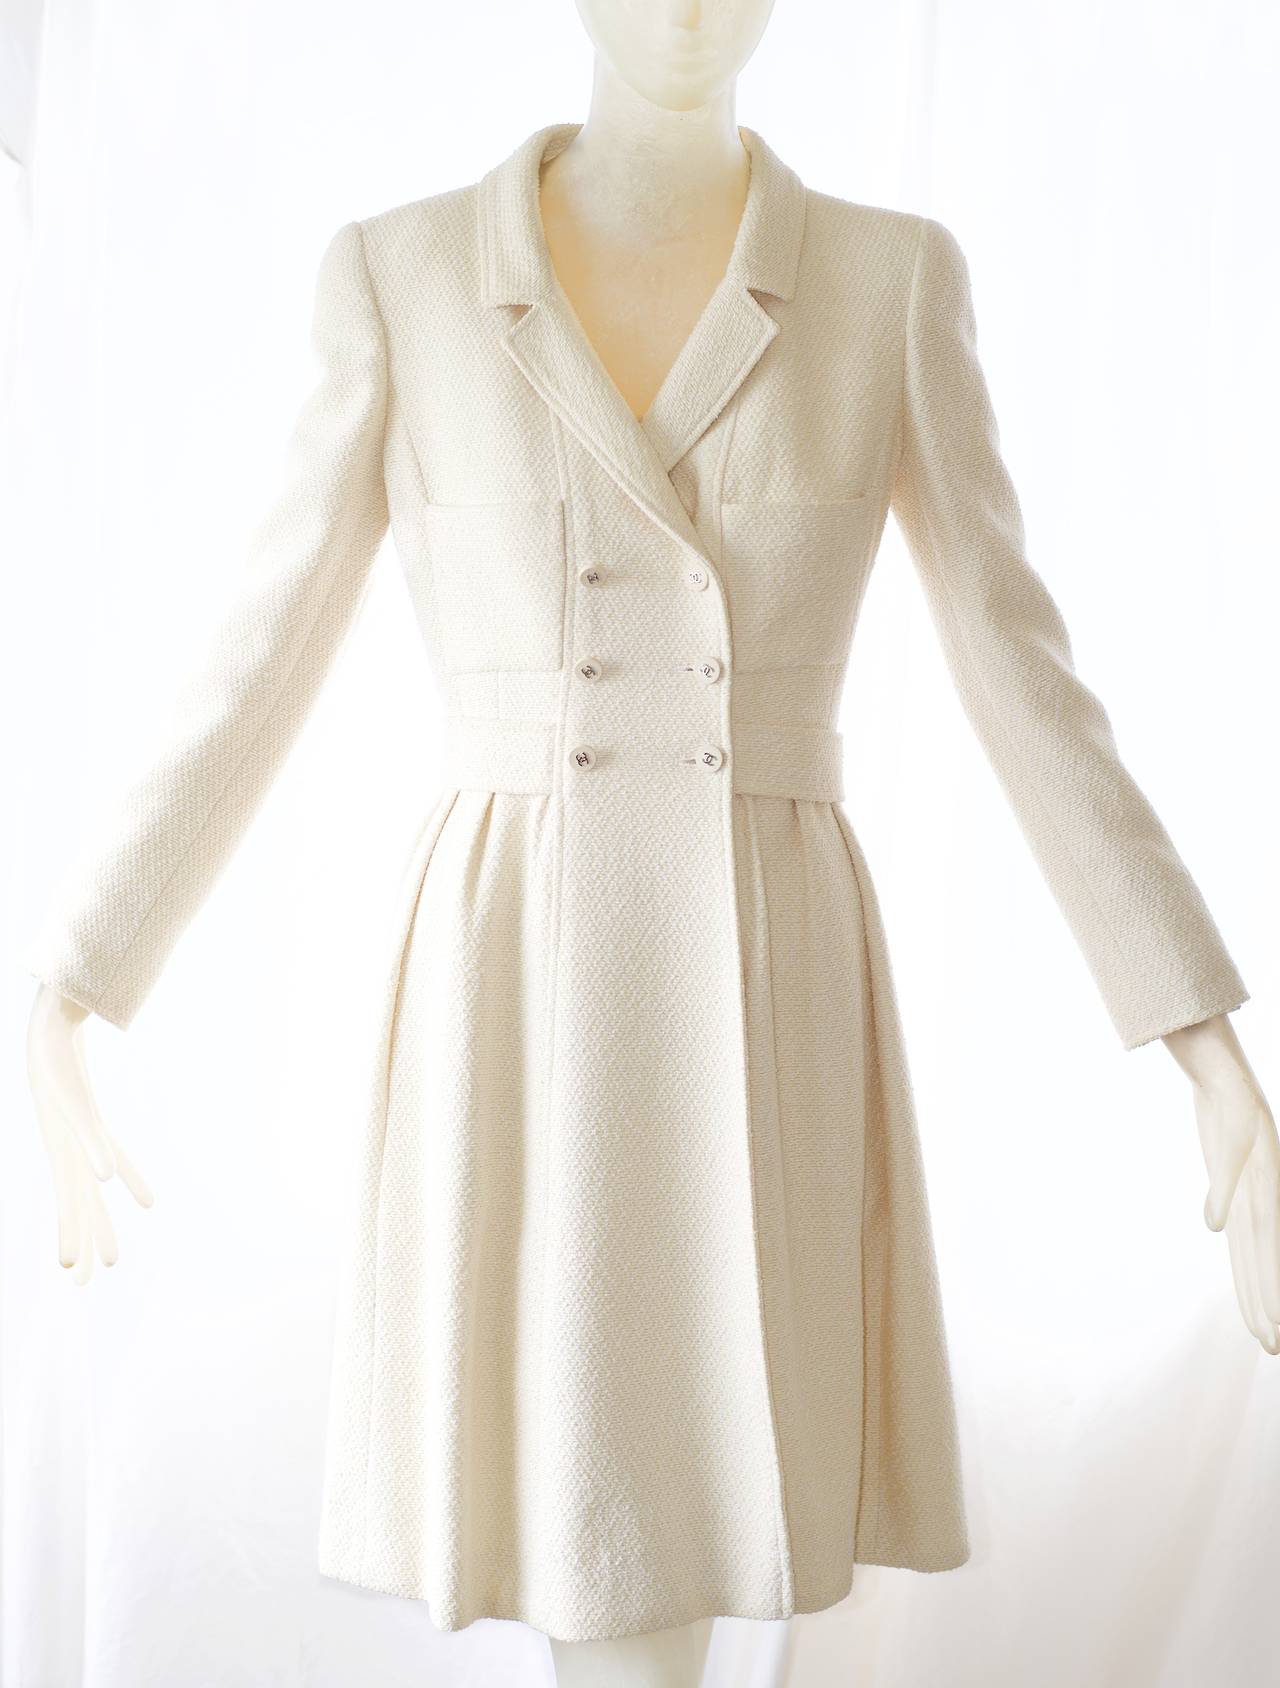 1990s Chanel Cream Jacket In Excellent Condition For Sale In New York, NY